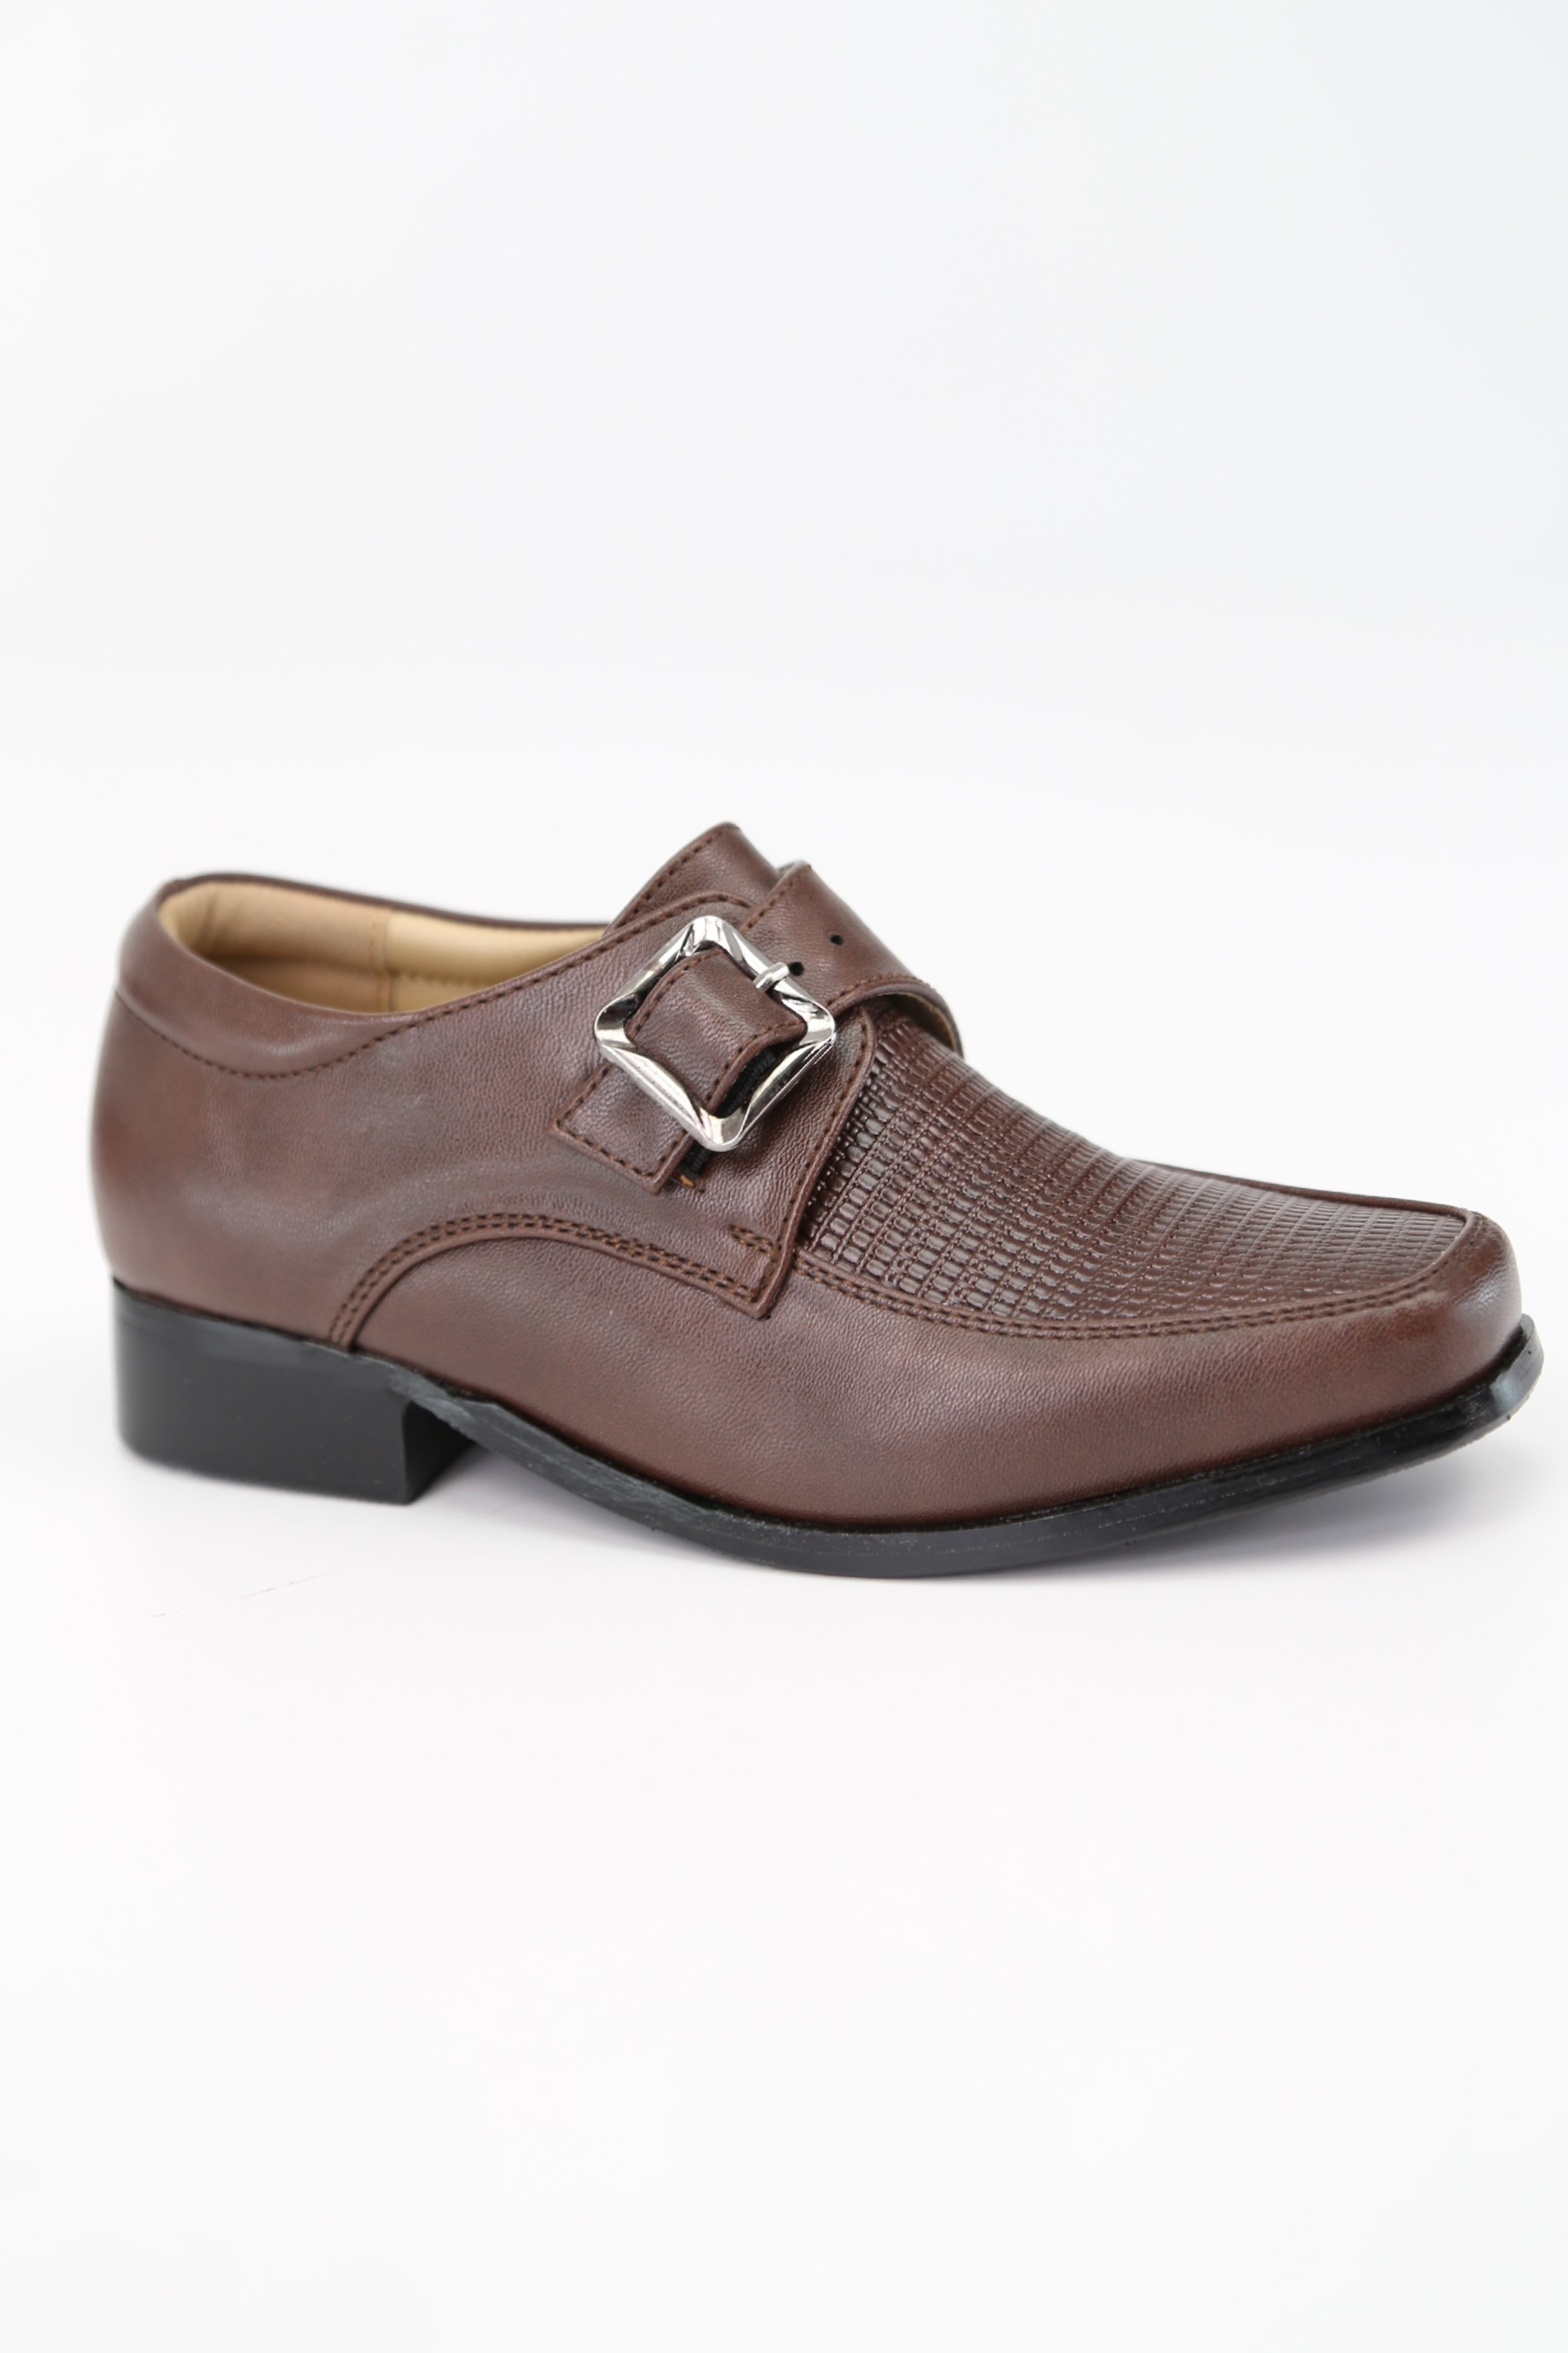 Boys Textured Leather Buckled Monk Shoes - Brown